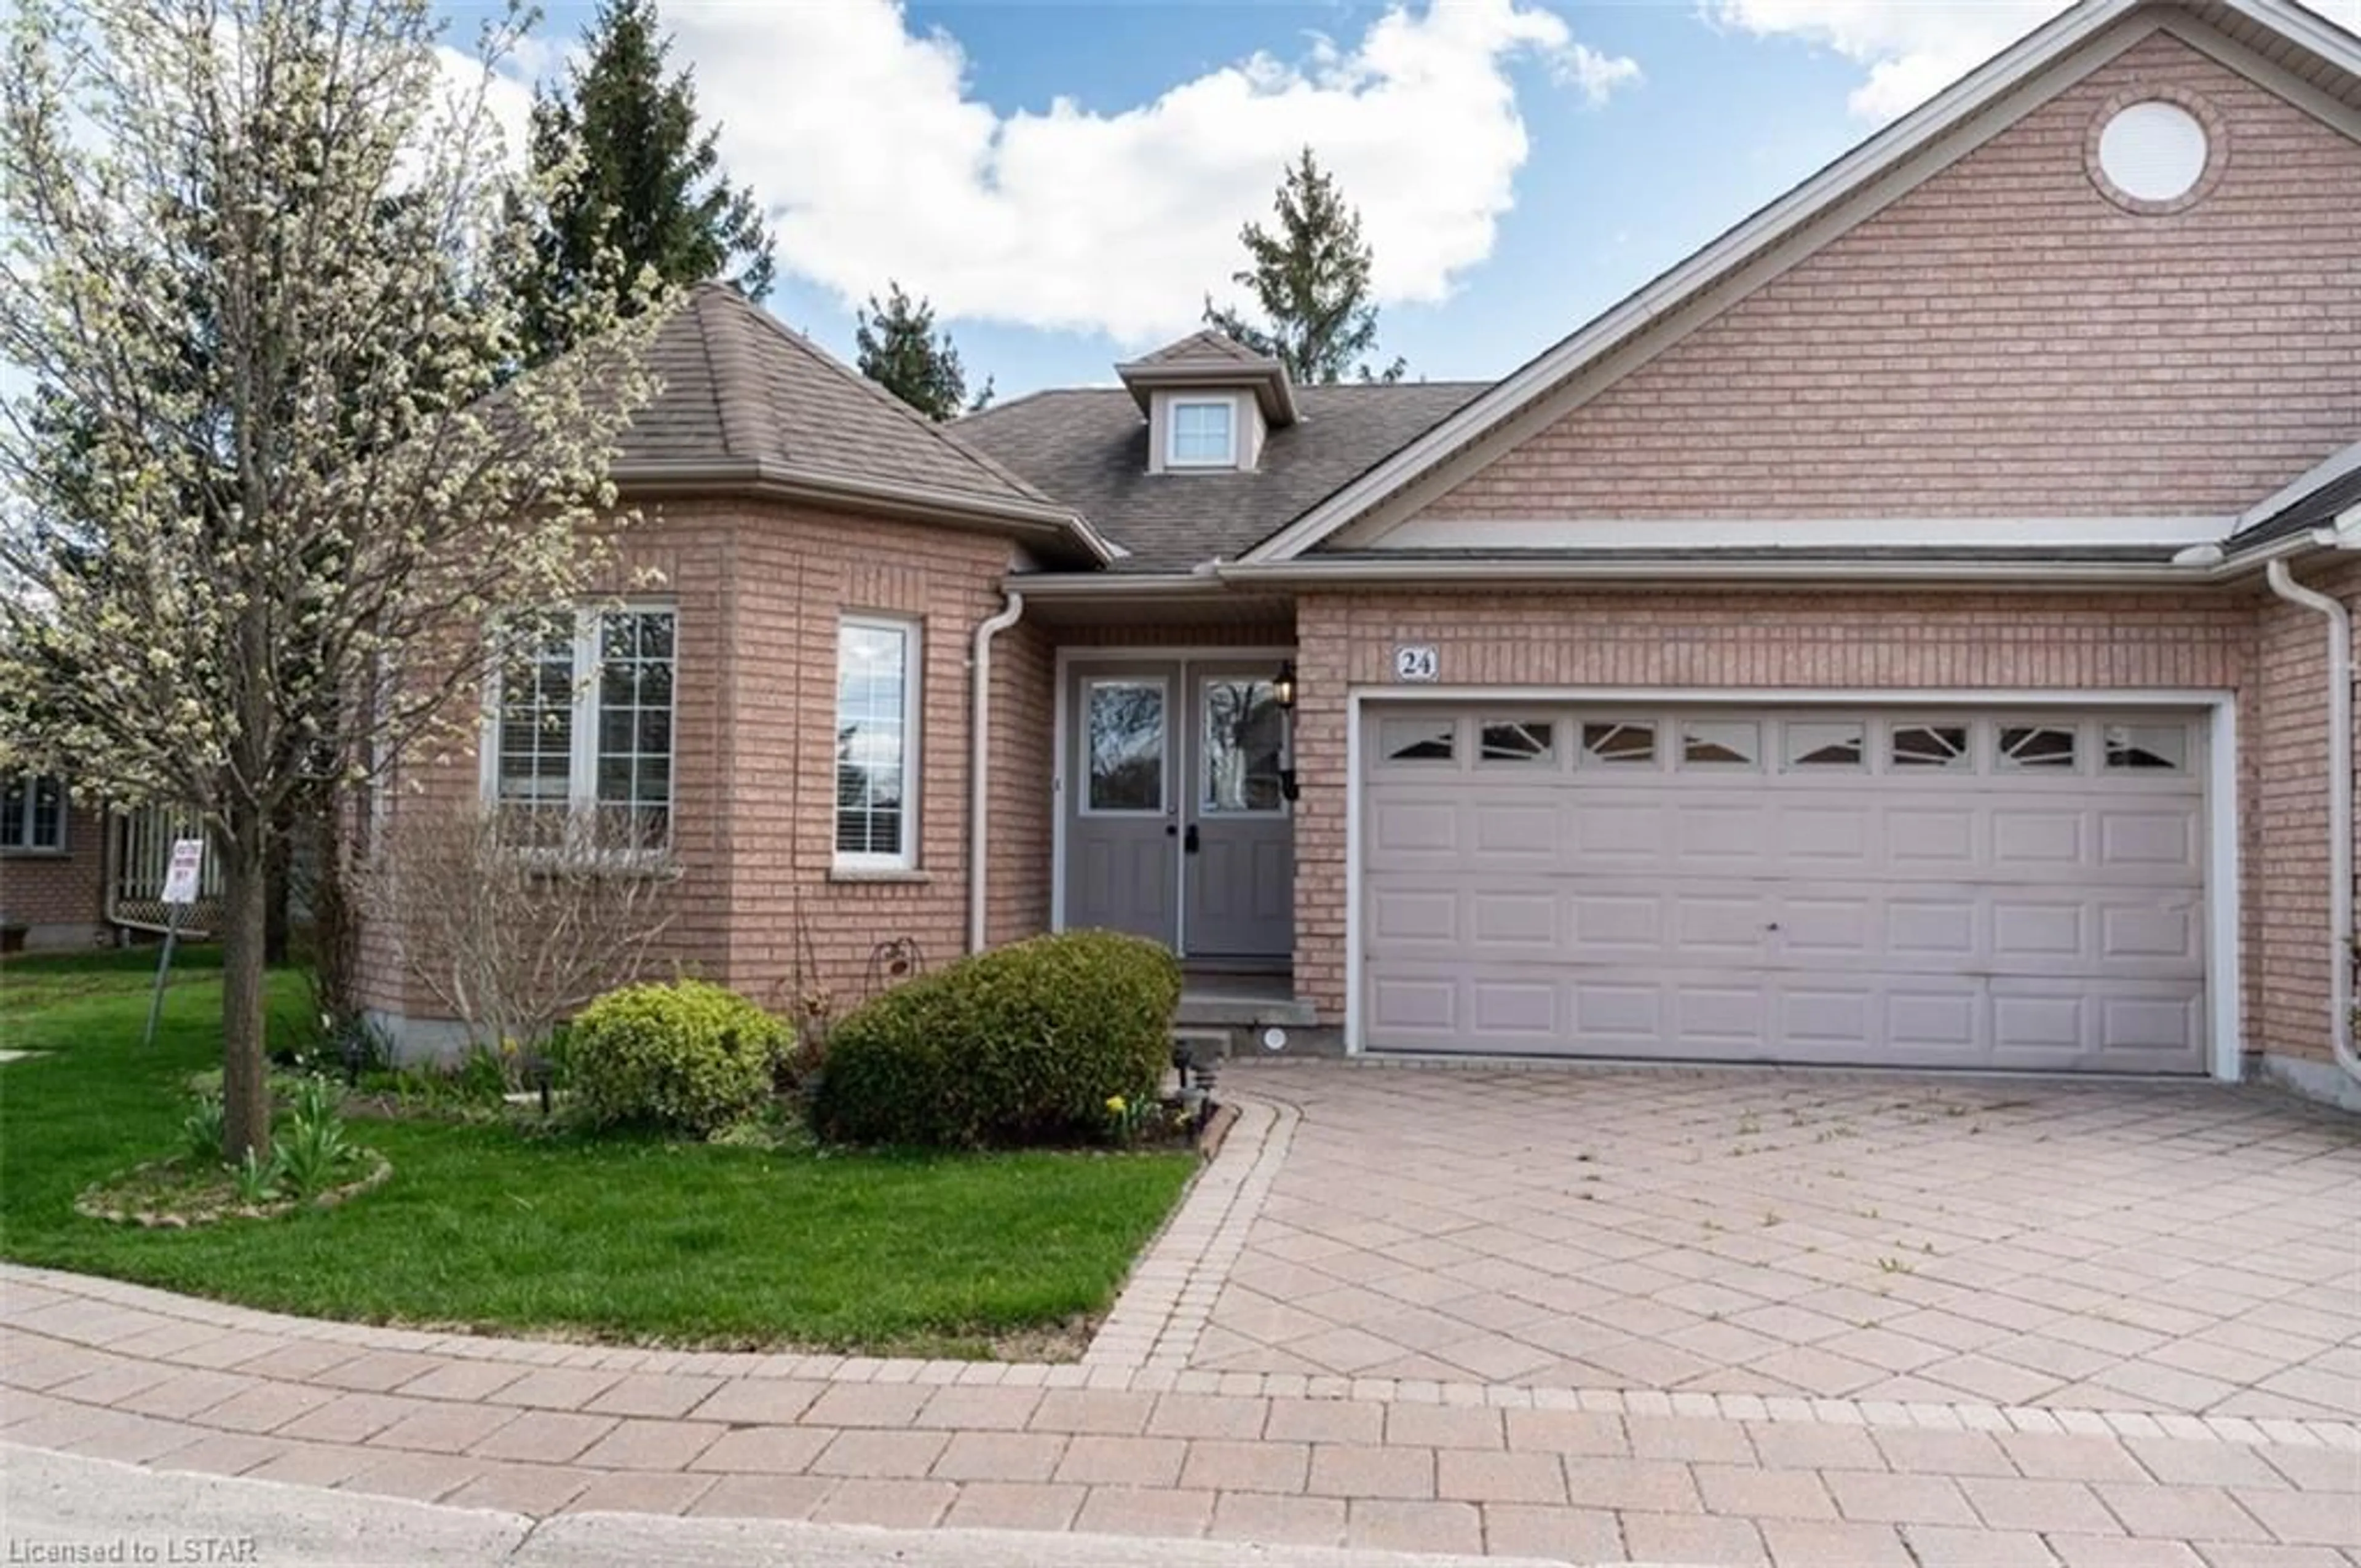 Home with brick exterior material for 638 Wharncliffe Rd #24, London Ontario N6J 2N4